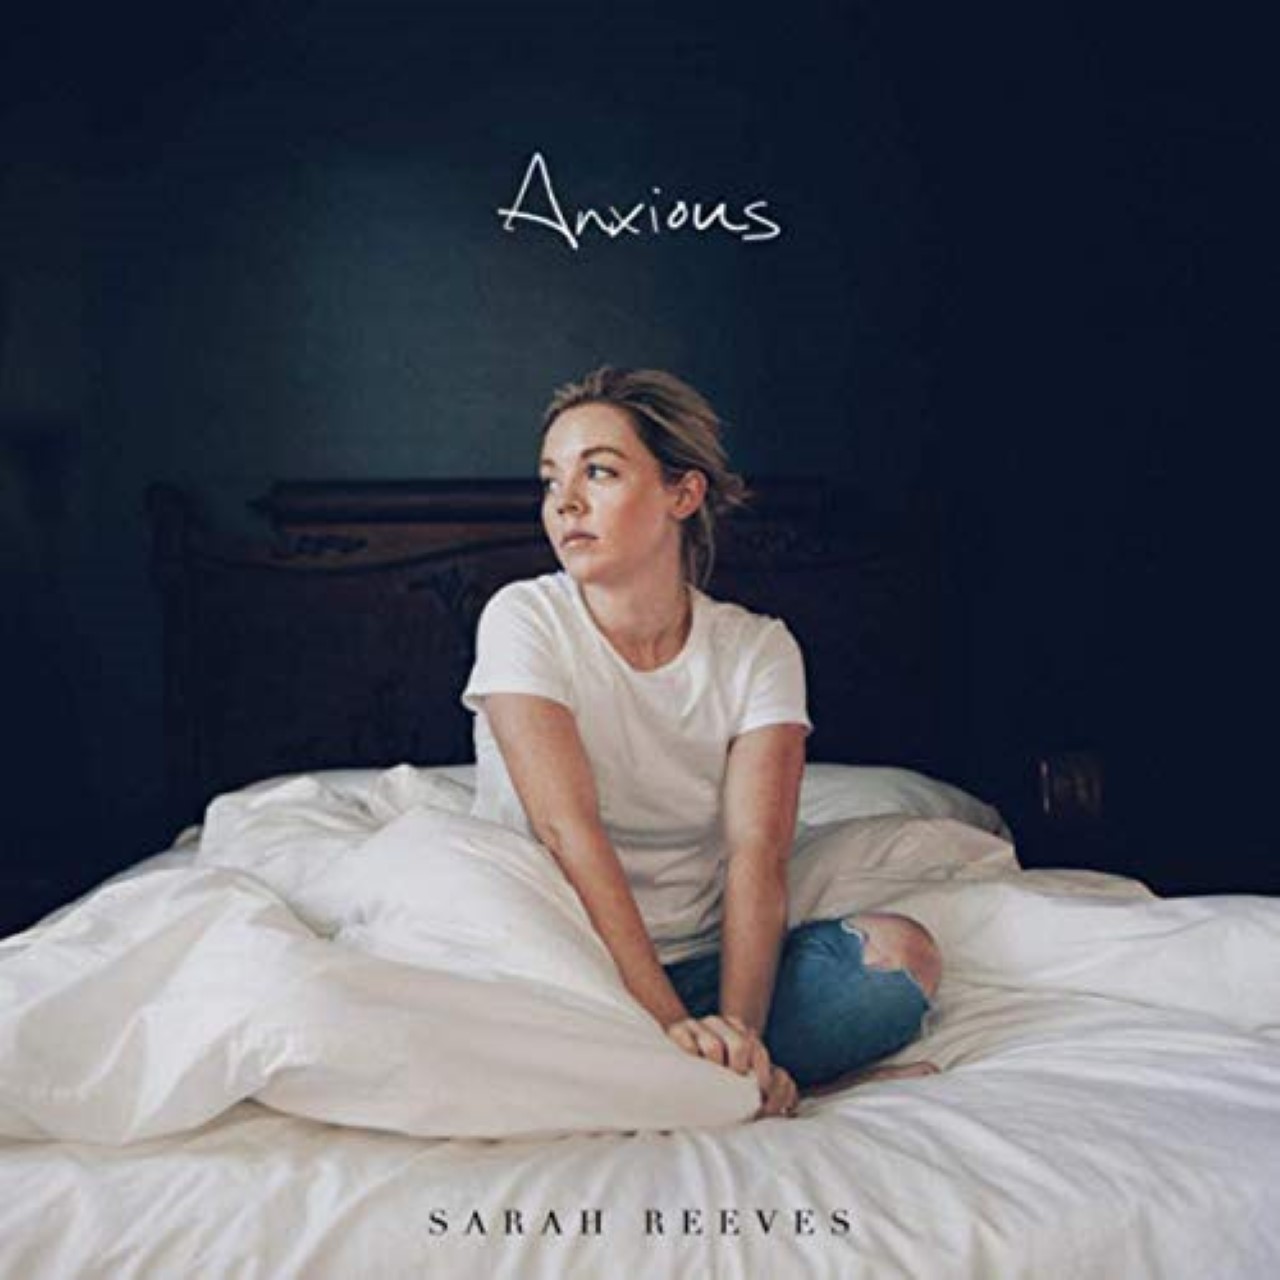 Art for Anxious by Sarah Reeves